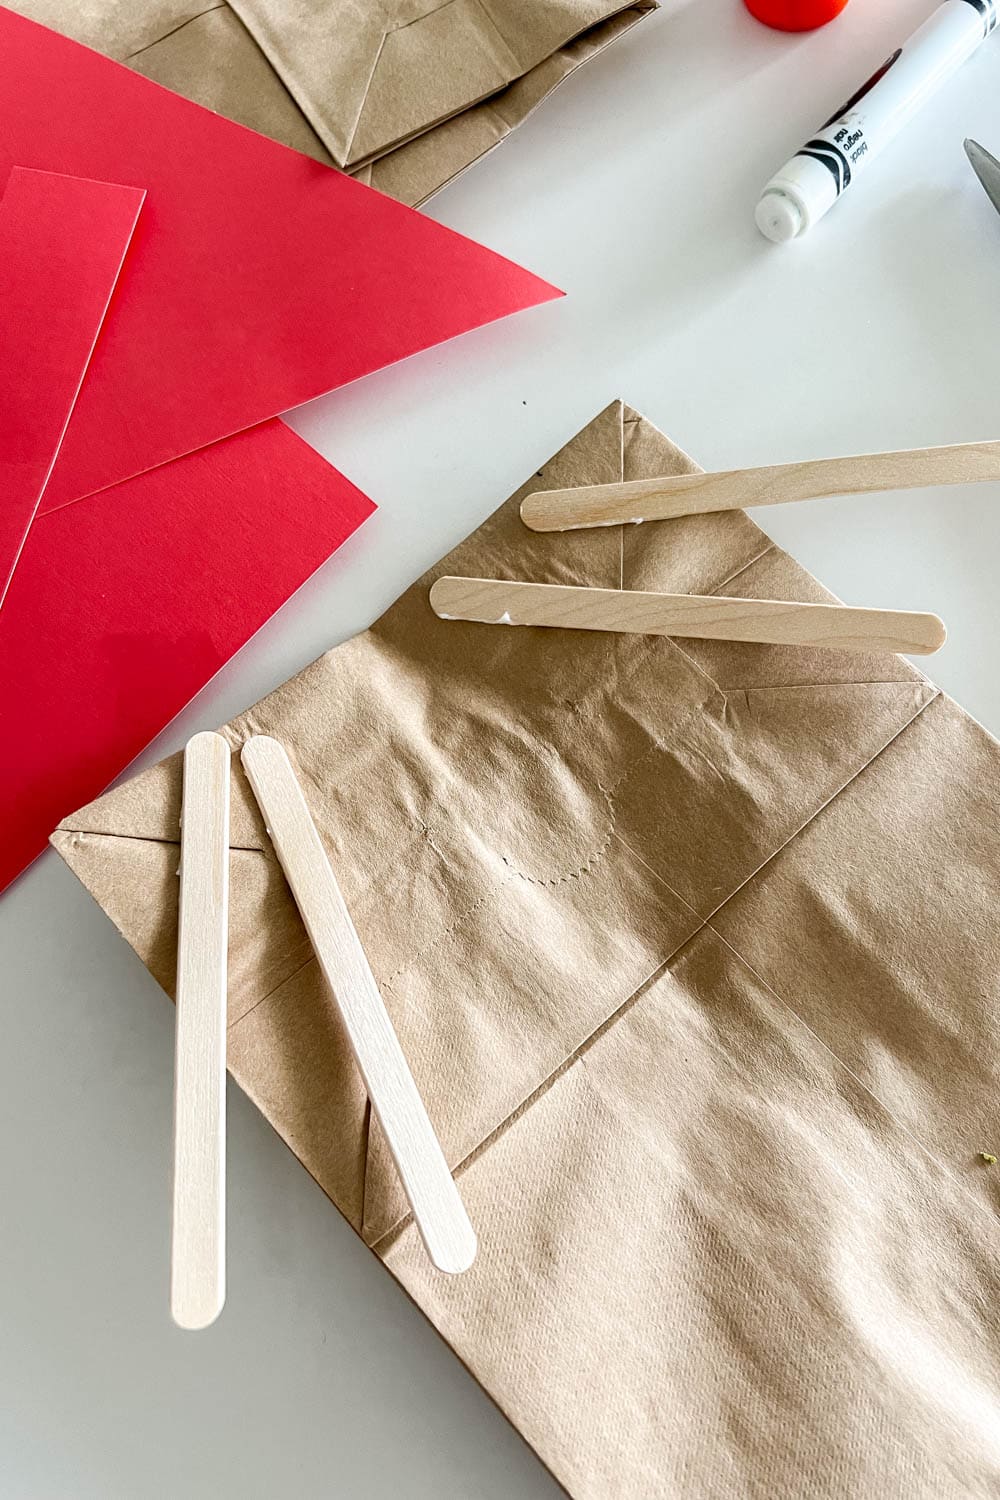 Gluing popsicle sticks on the paper bag